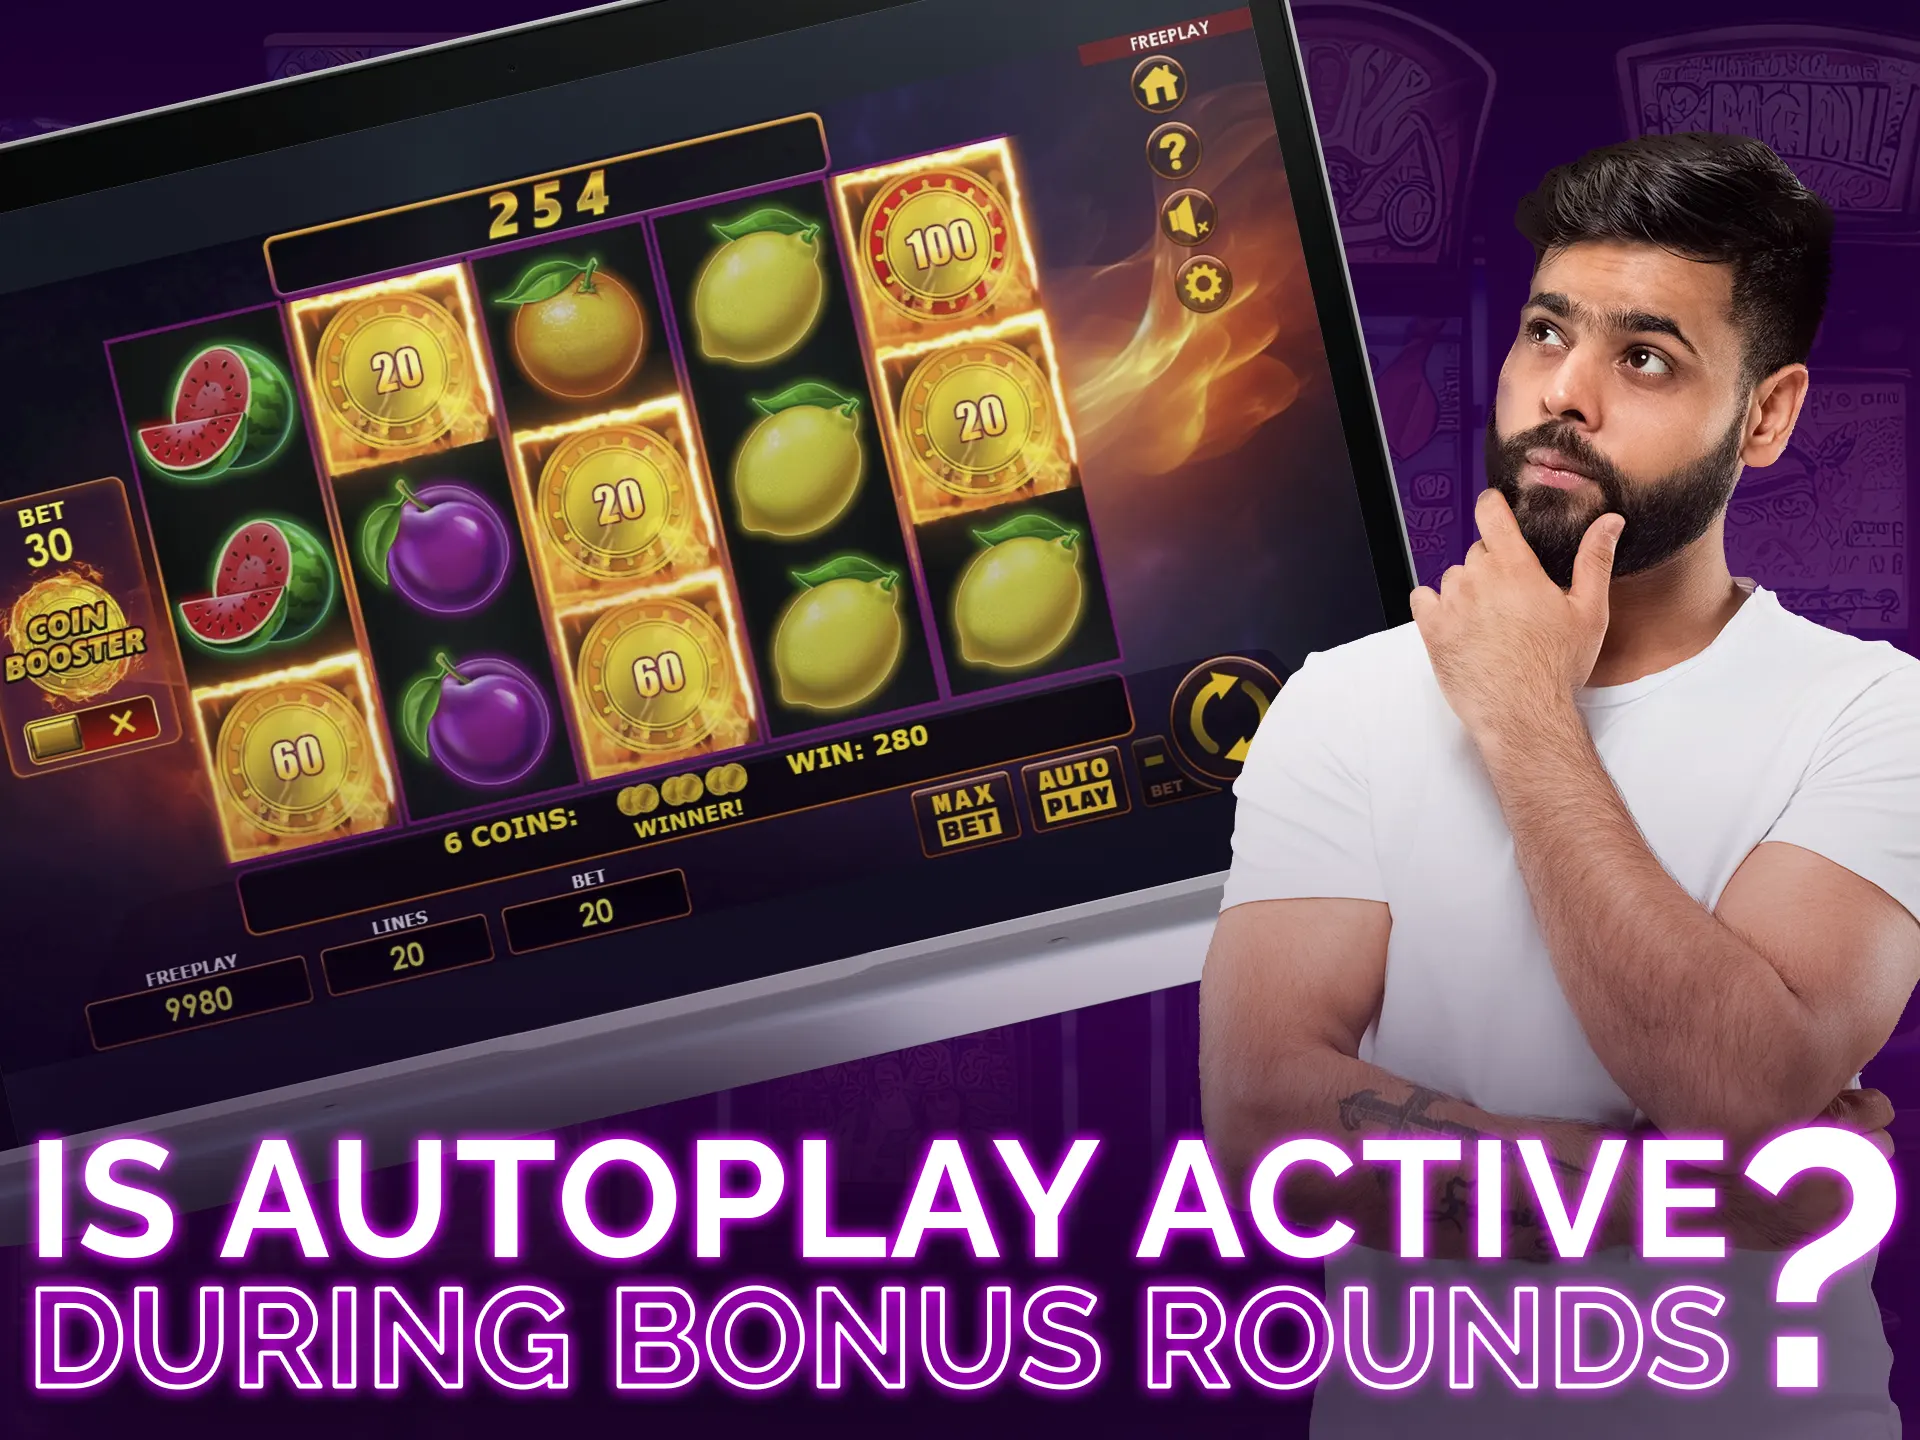 Autoplay during bonus rounds varies by slot and provider.